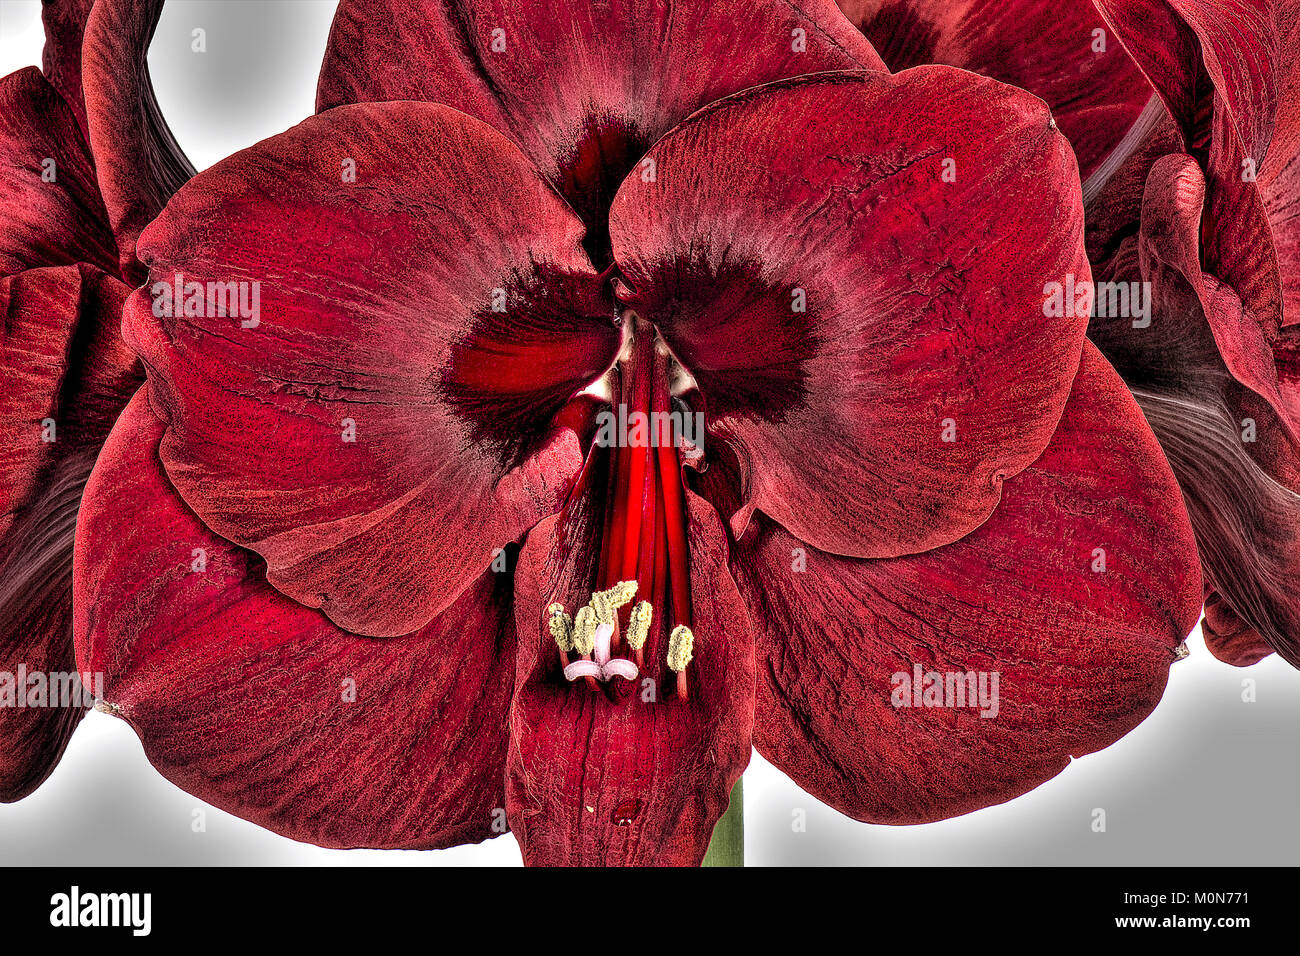 Deep red flowers from large bulb of Amaryllis, Hippeastrum spp, at Christmas Stock Photo